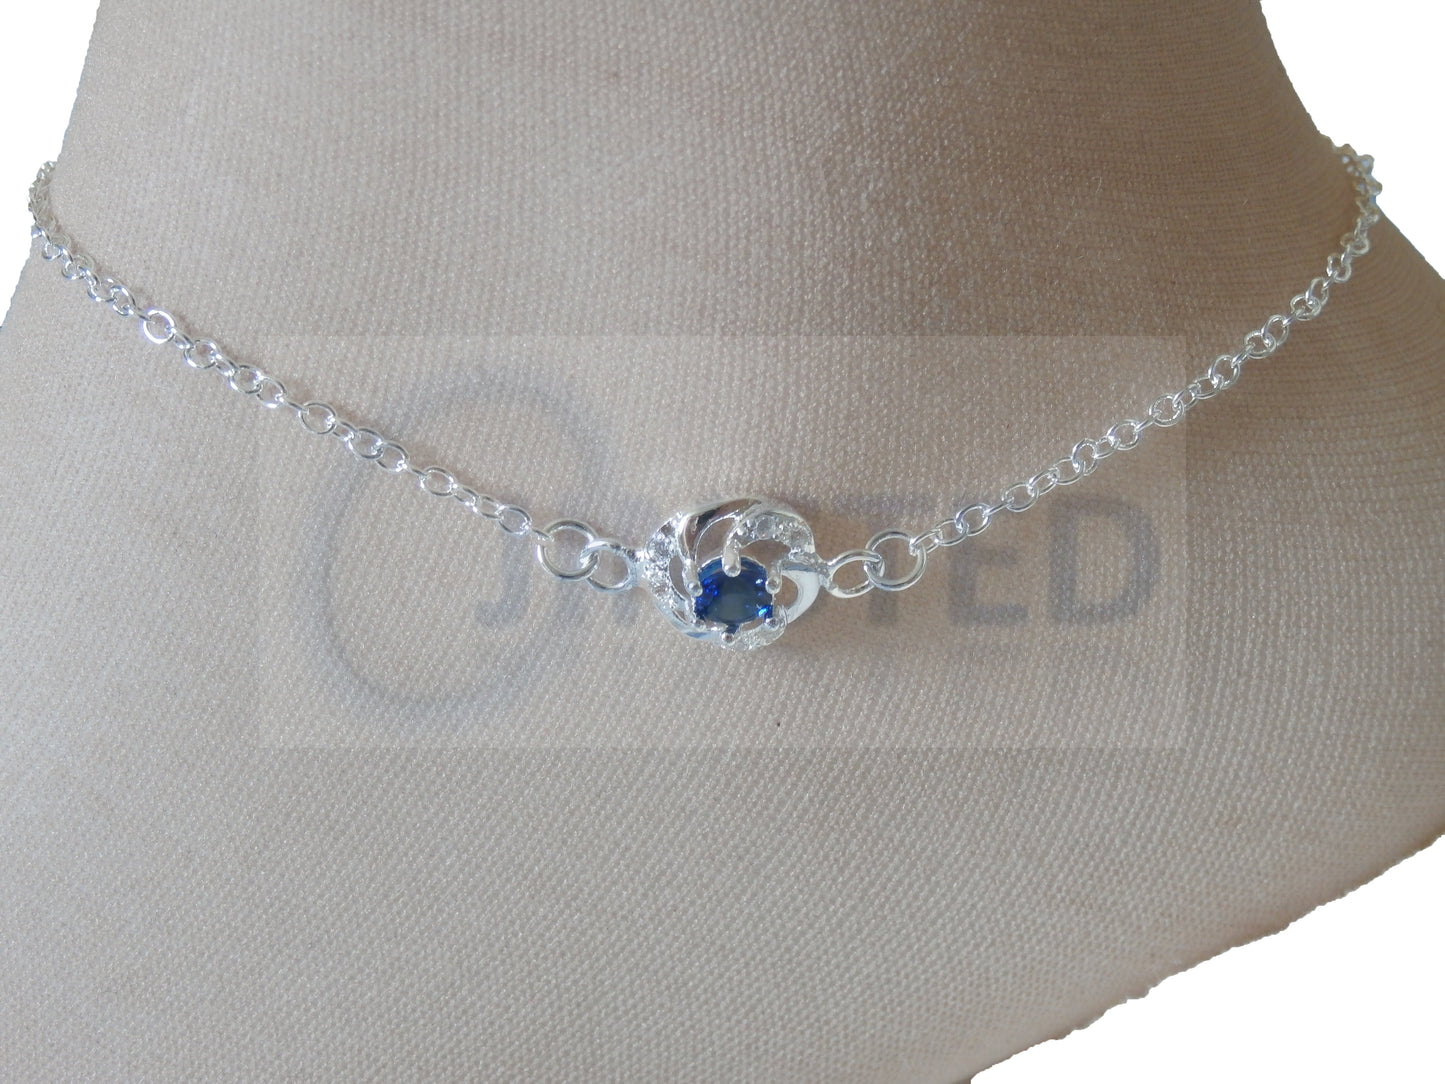 Ladies Jewellery, Silver Anklet with Blue Jewel Design, Jinsted